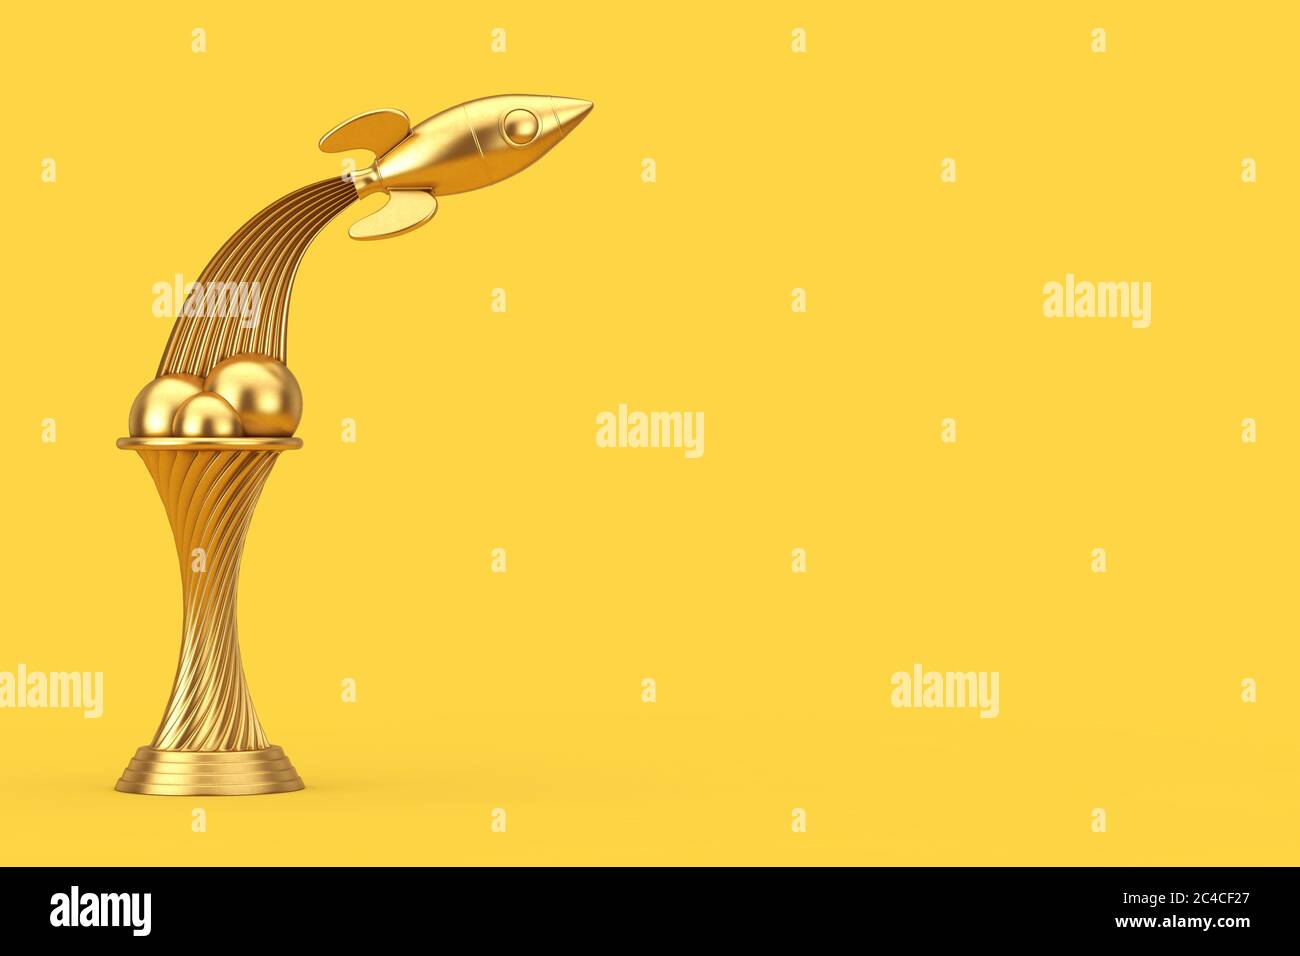 Space Exploration Concept. Golden Award Trophy Fly Up Rocket on a yellow background. 3d Rendering Stock Photo